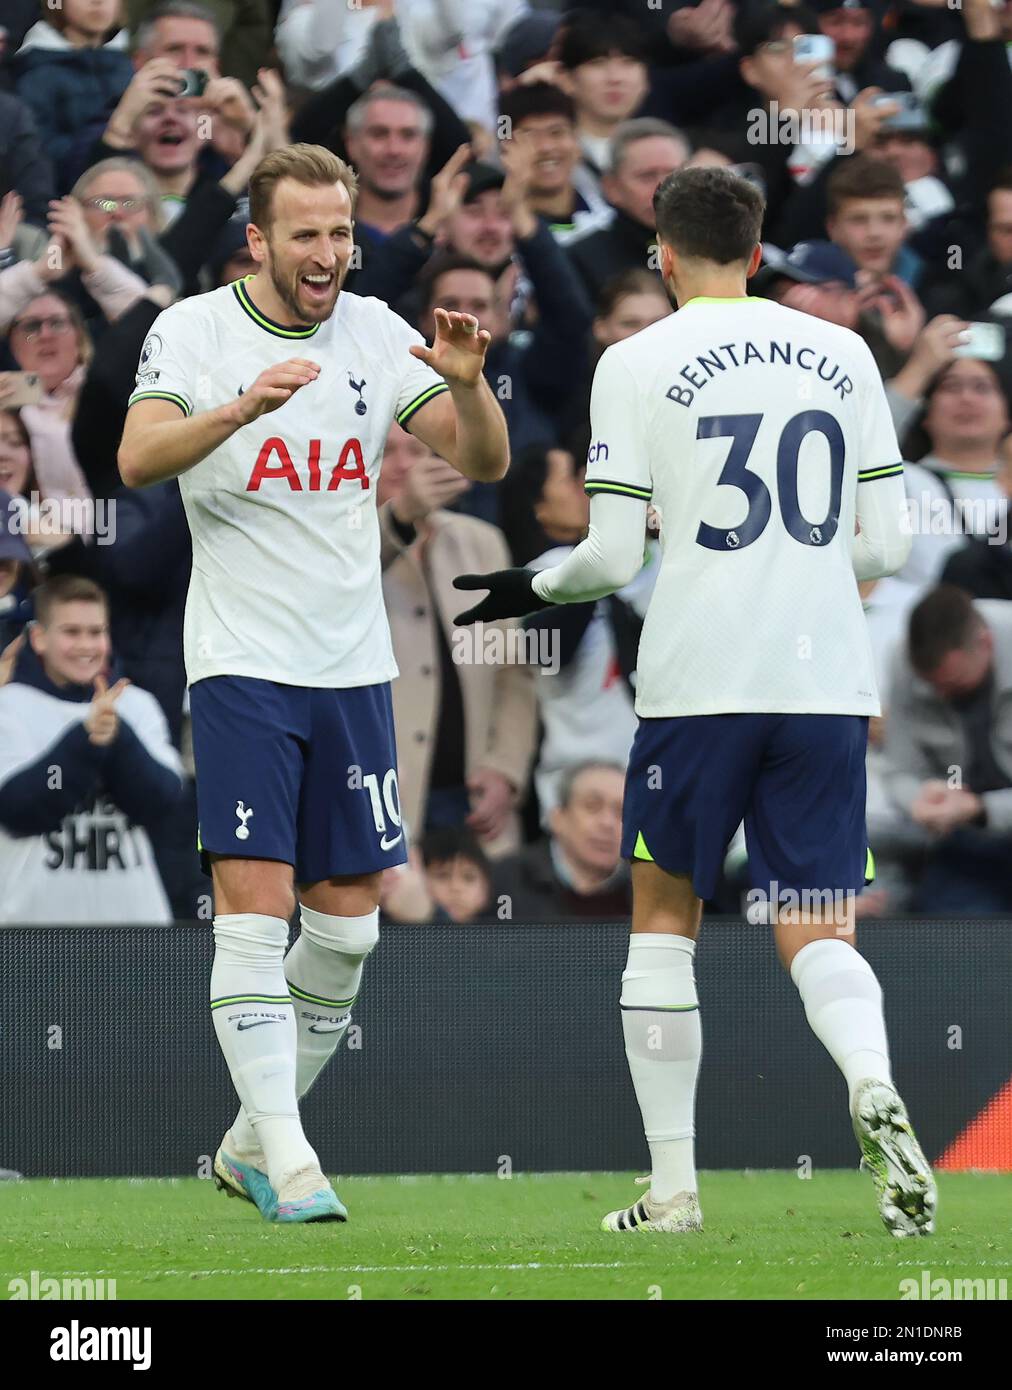 Tottenham Hotspur's Harry Kane celebrates his goal during the English Premier League soccer match between Tottenham Hotspur and Manchester City at Tot Stock Photo